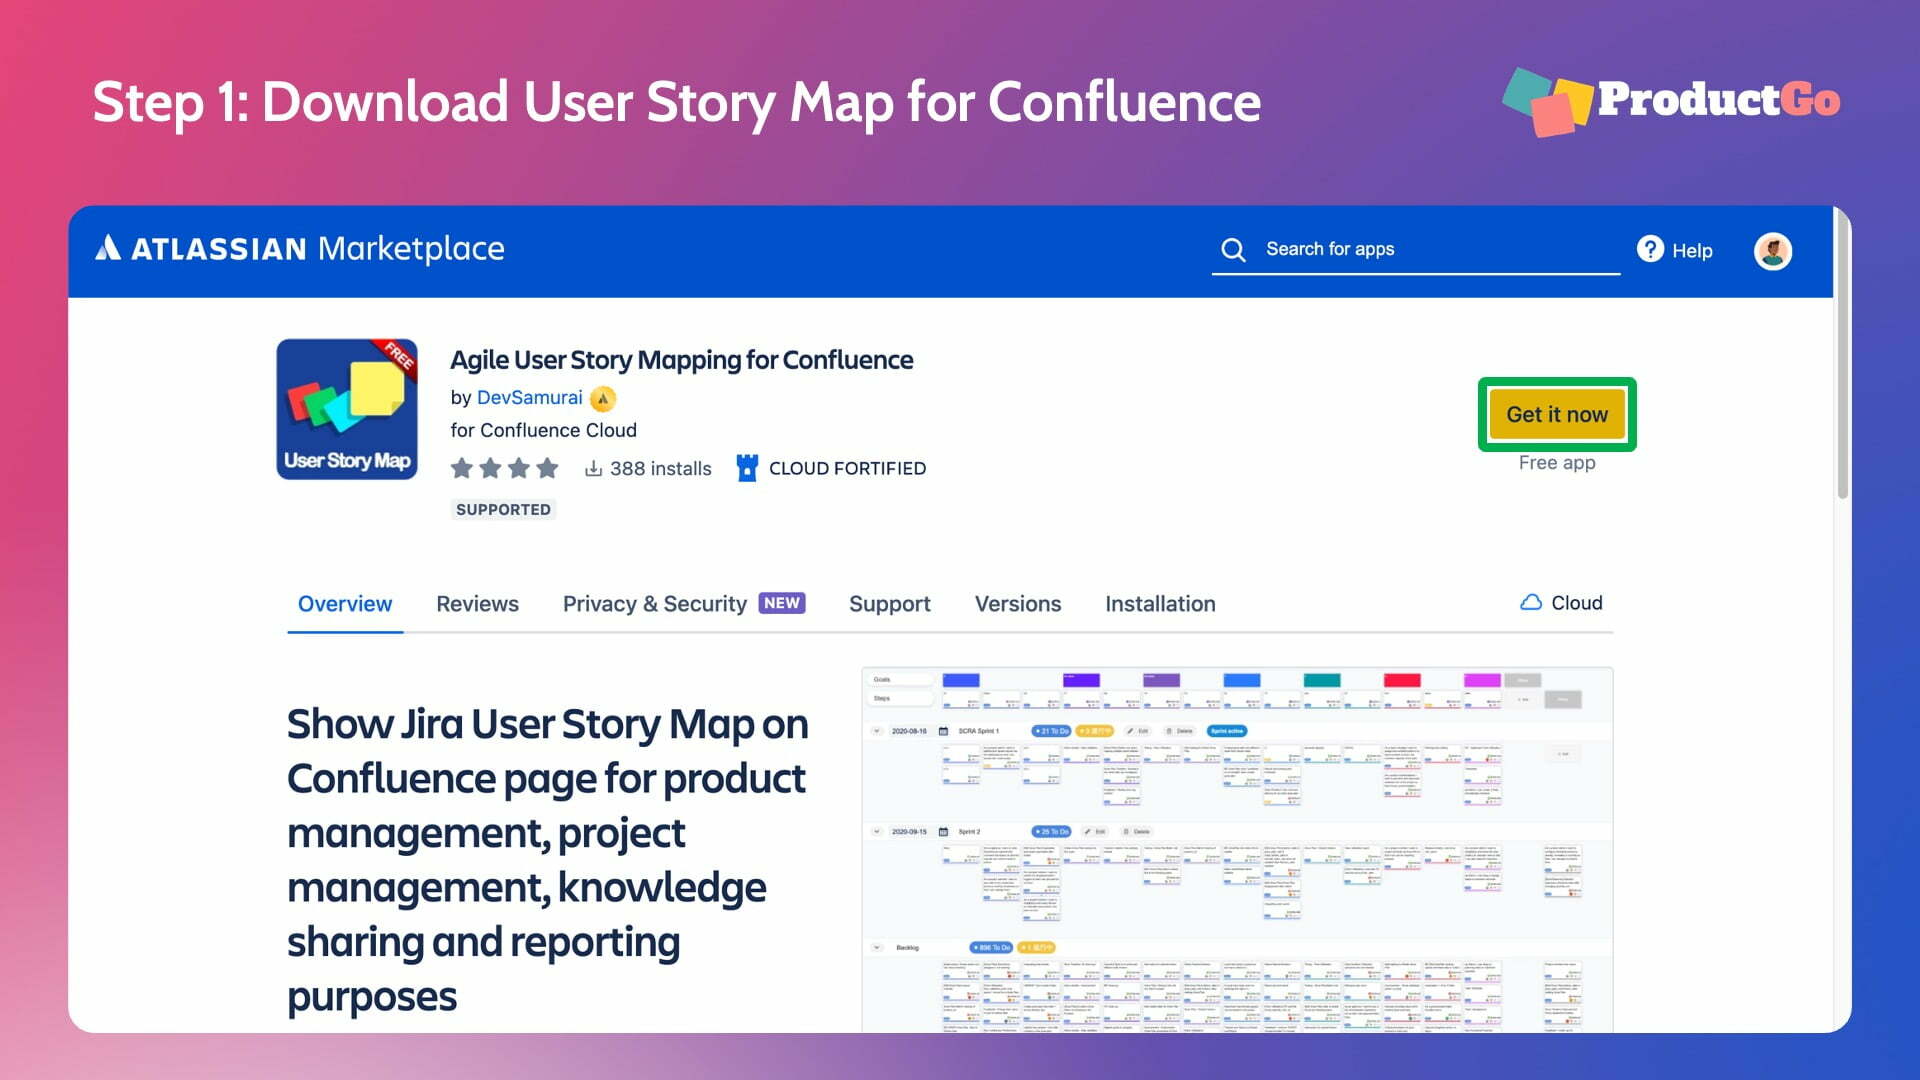 Step 1 Download Agile User Story Mapping for Confluence